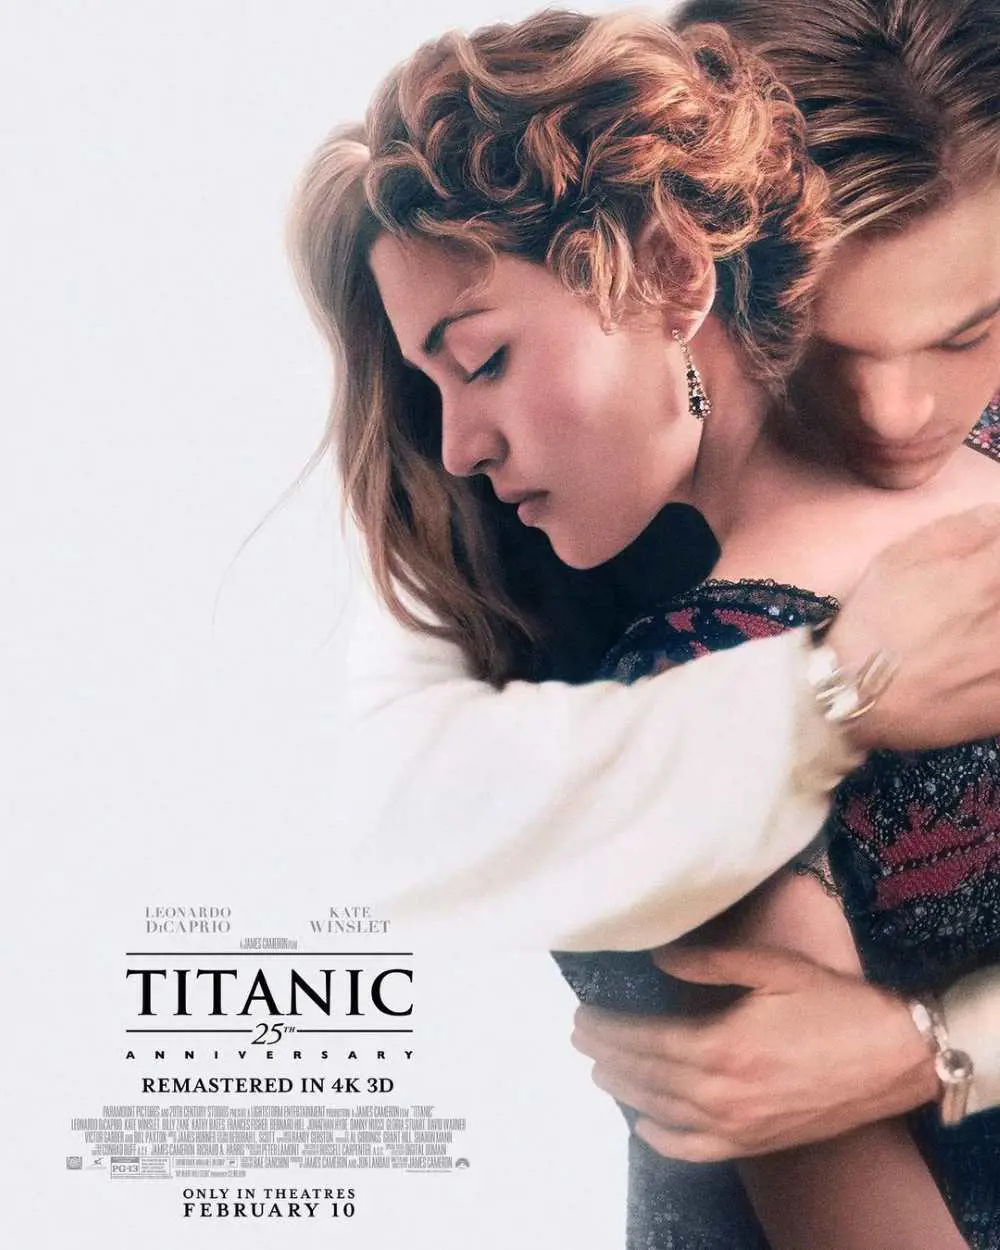 1997 American disaster film, Titanic, directed by James Cameron, is based on accounts of the sinking of RMS Titanic